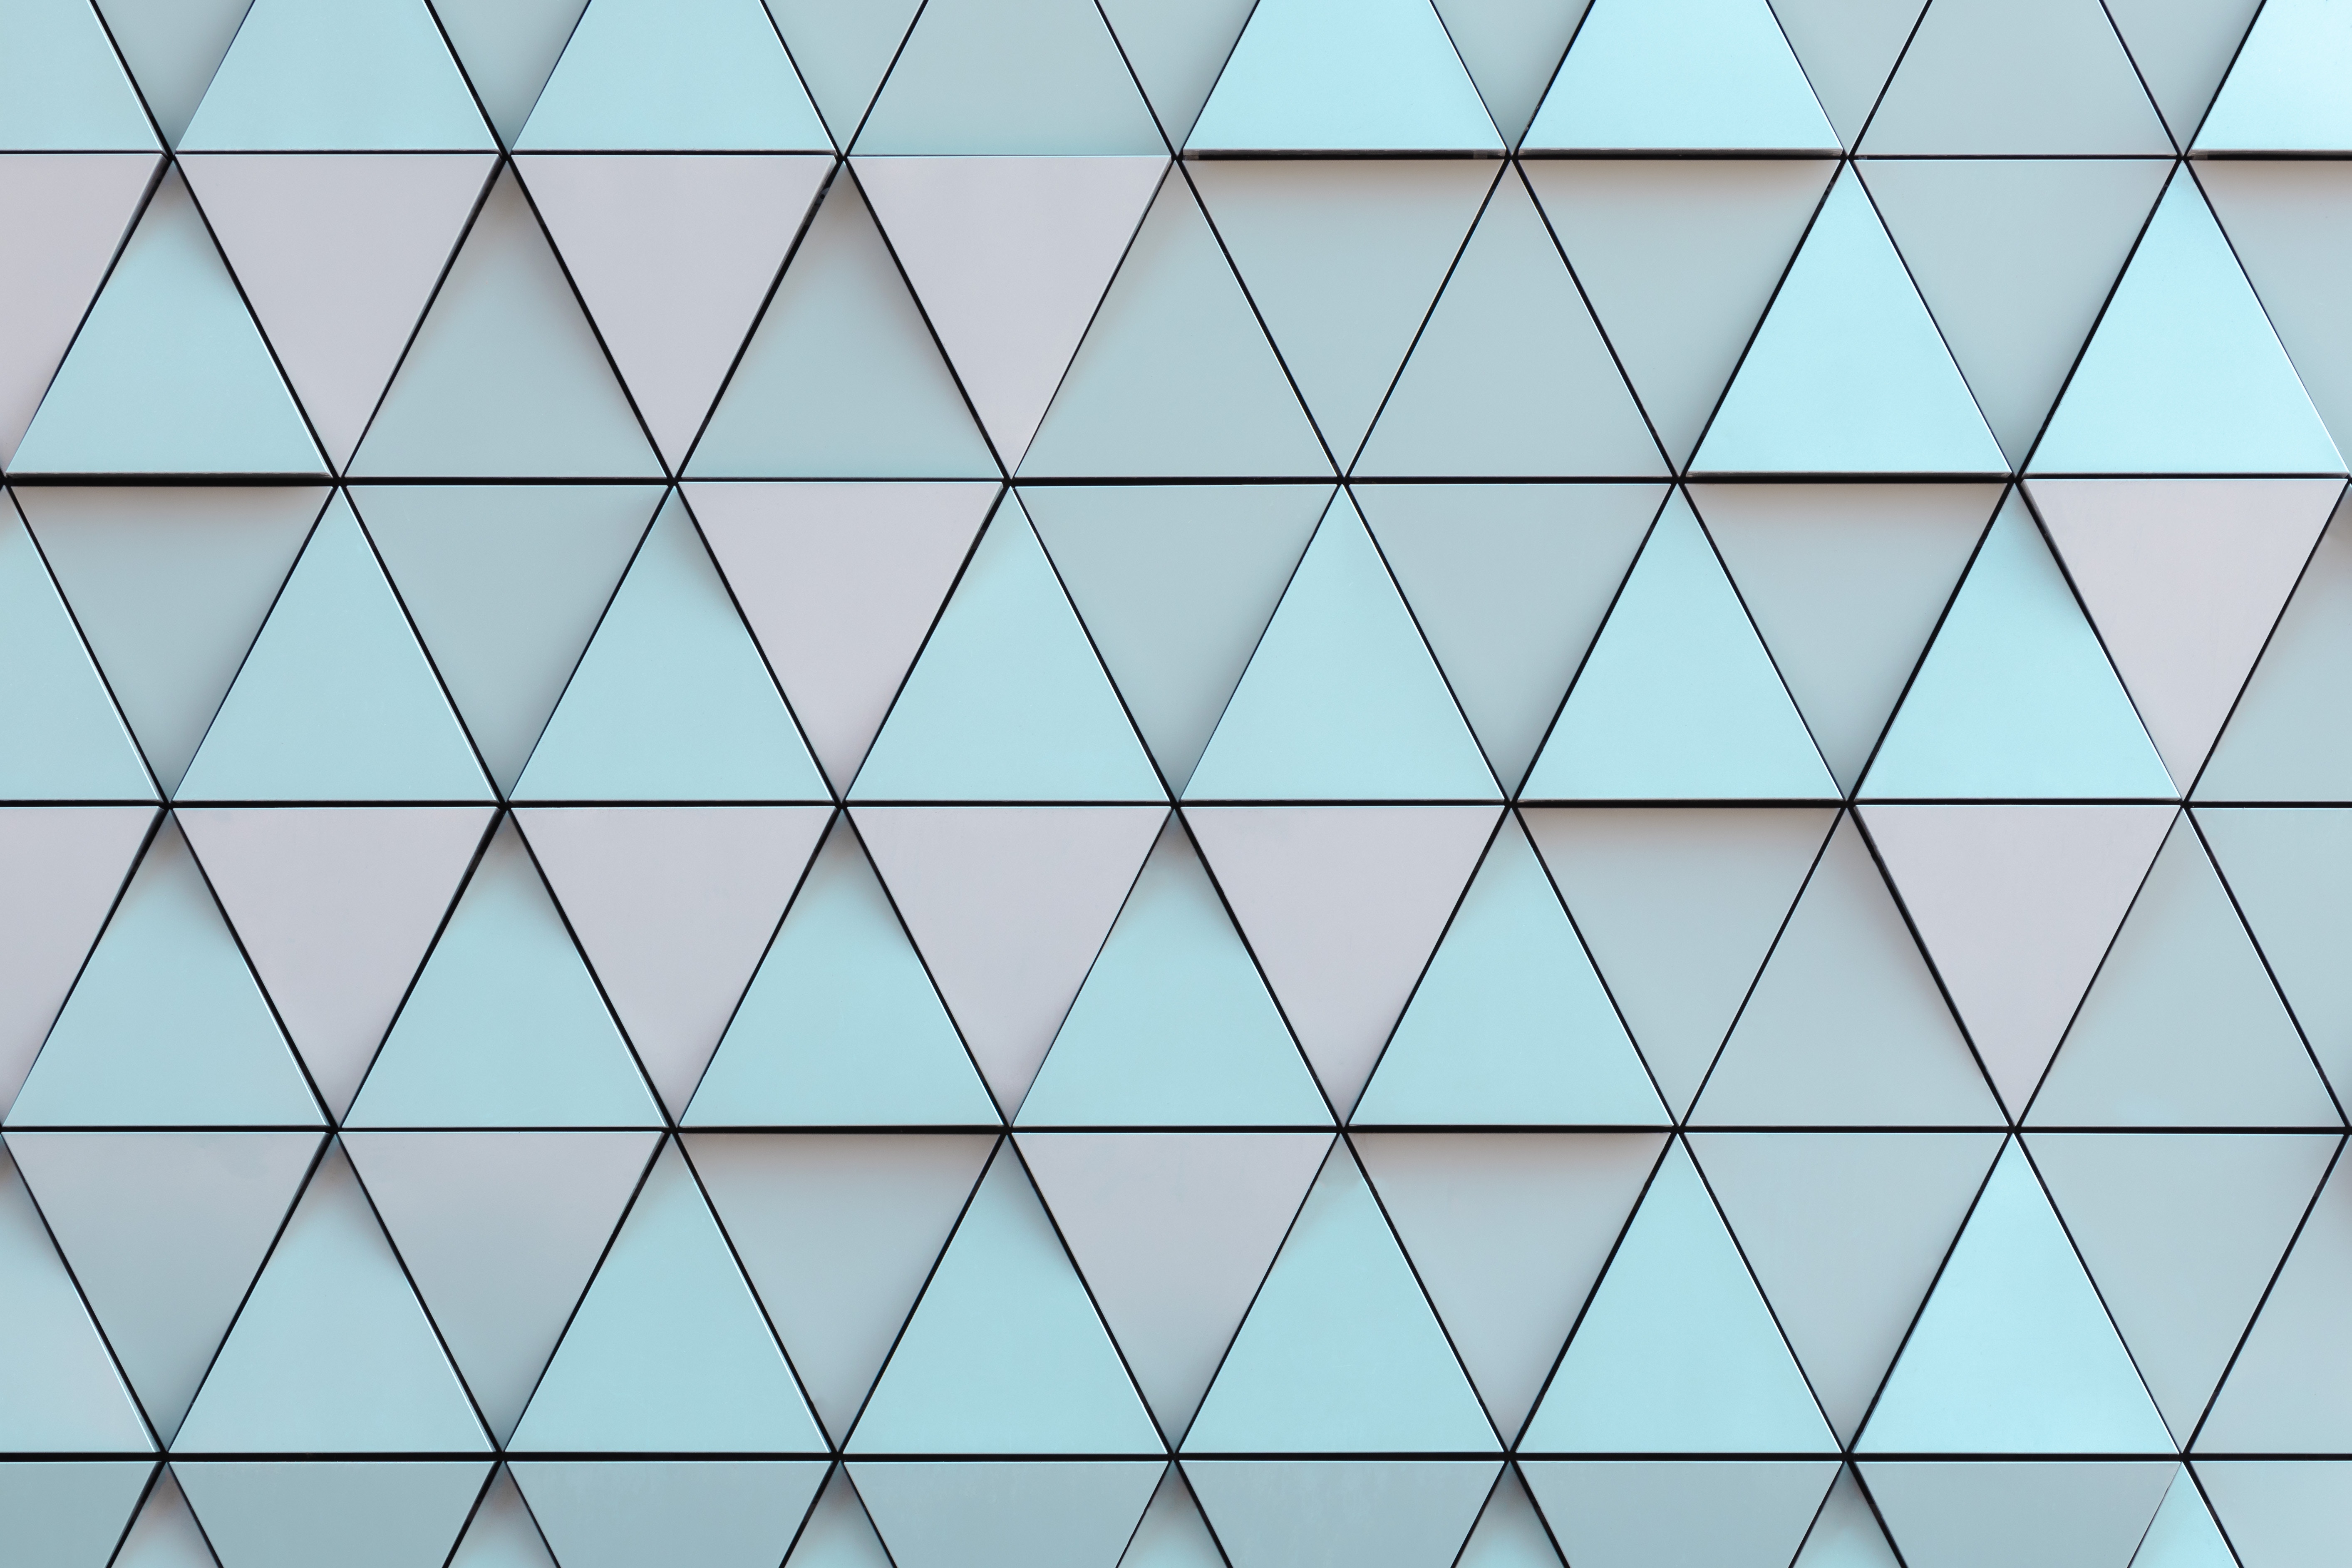 Wallpaper for mobile devices texture, triangles, textures, wall